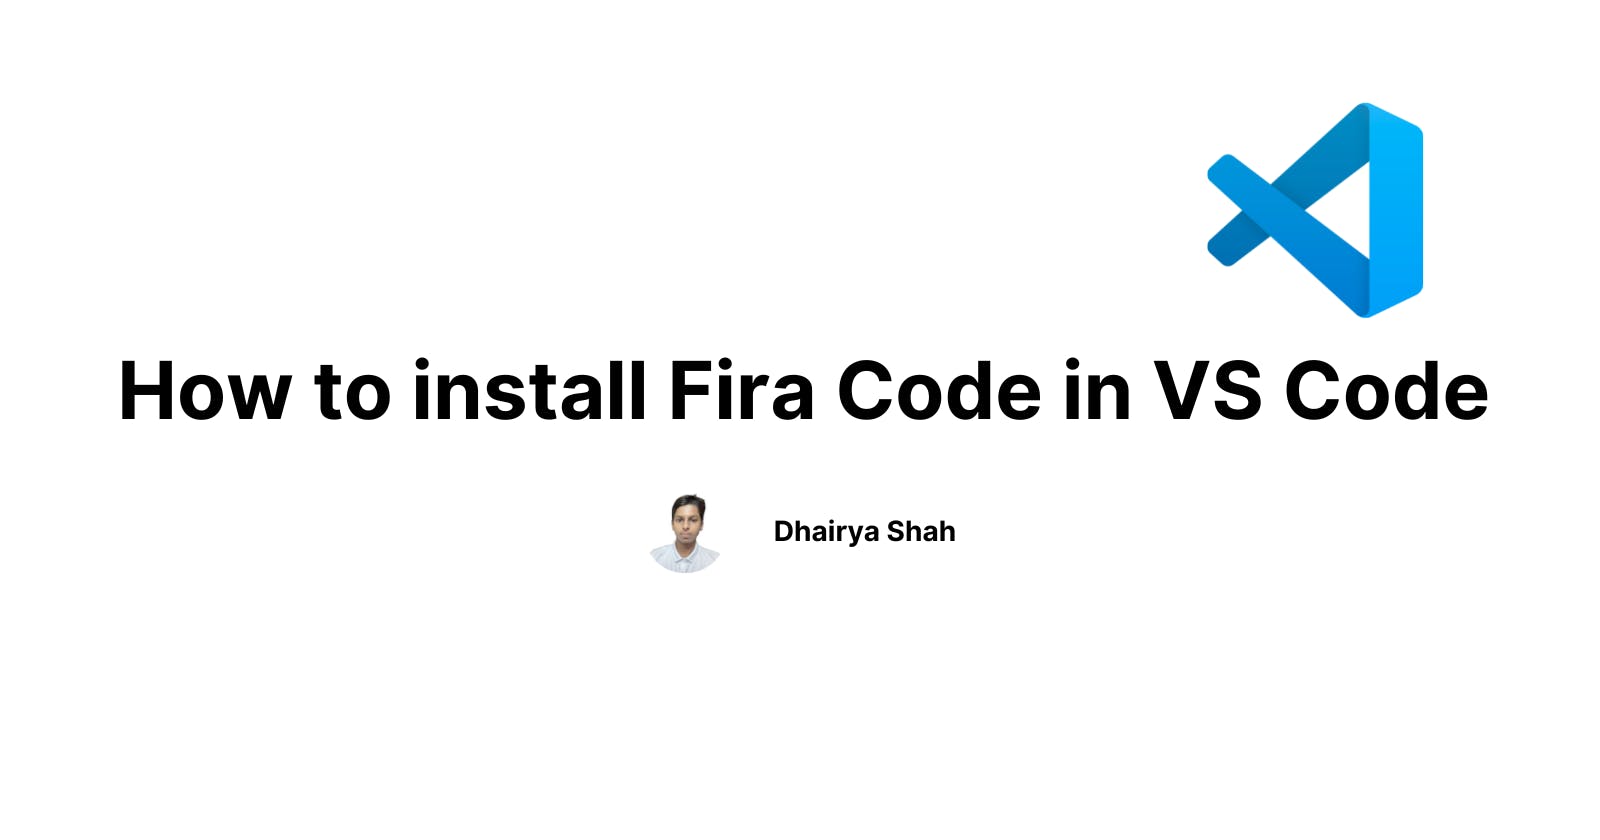 How to install Fira Code font in Visual Studio Code